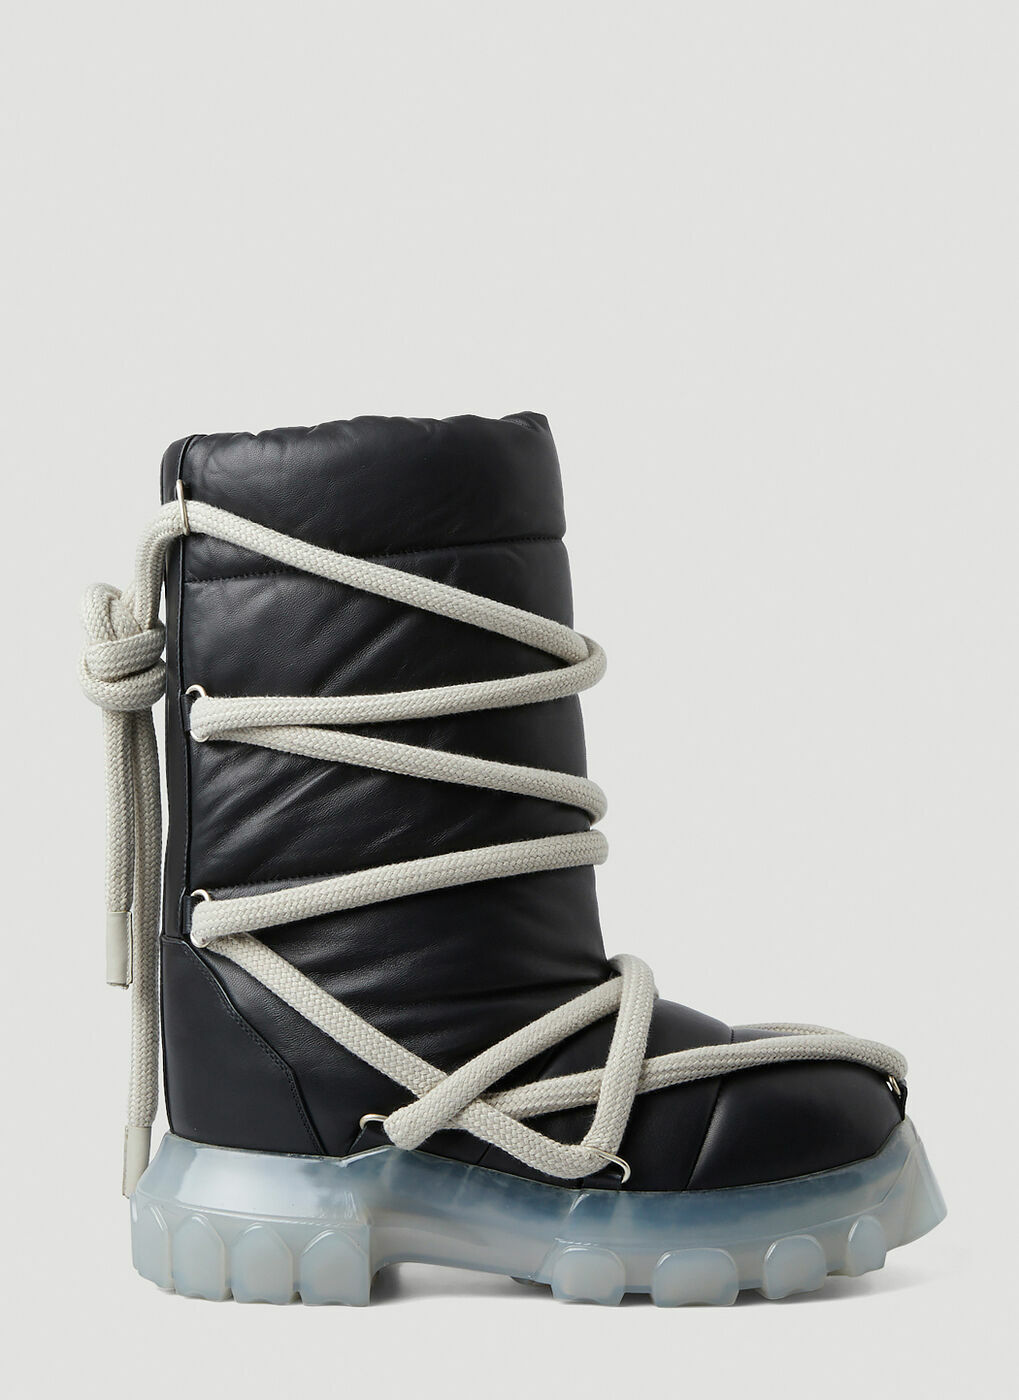 Rope Wrap Around Boots in Black